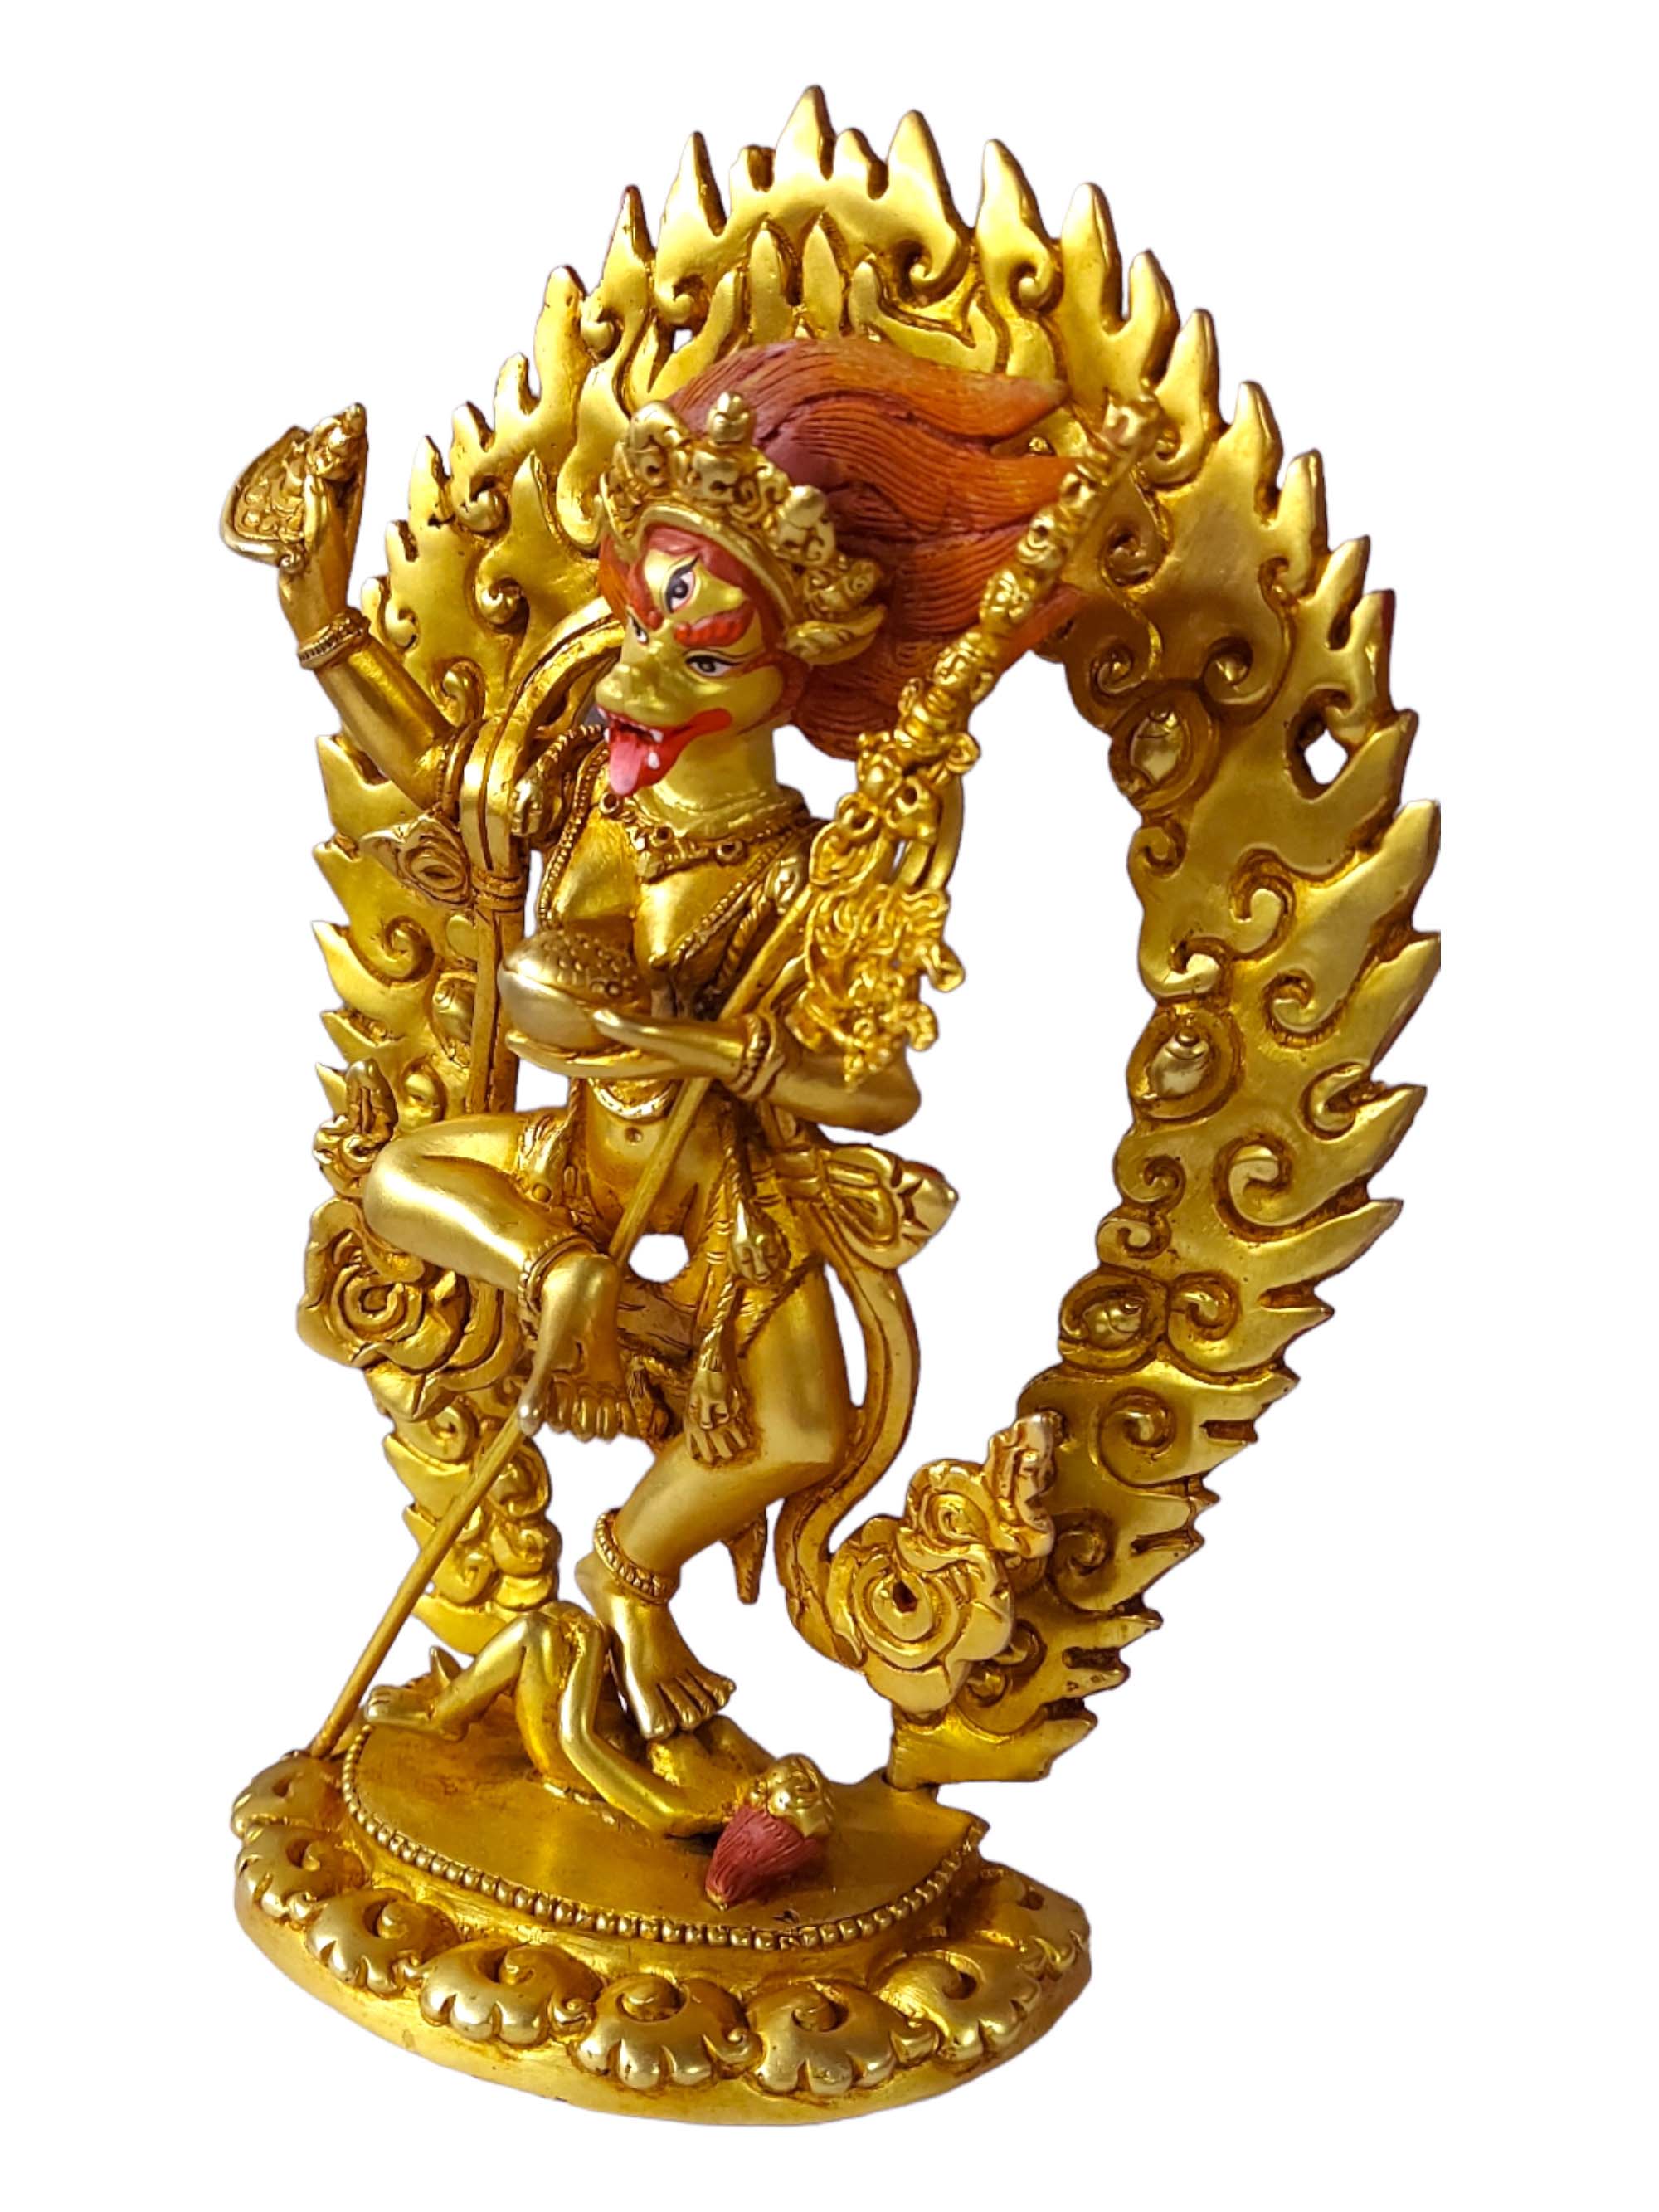 Simhamukha Yogini, Buddhist Full Gold Plated Statue, With Painted Face